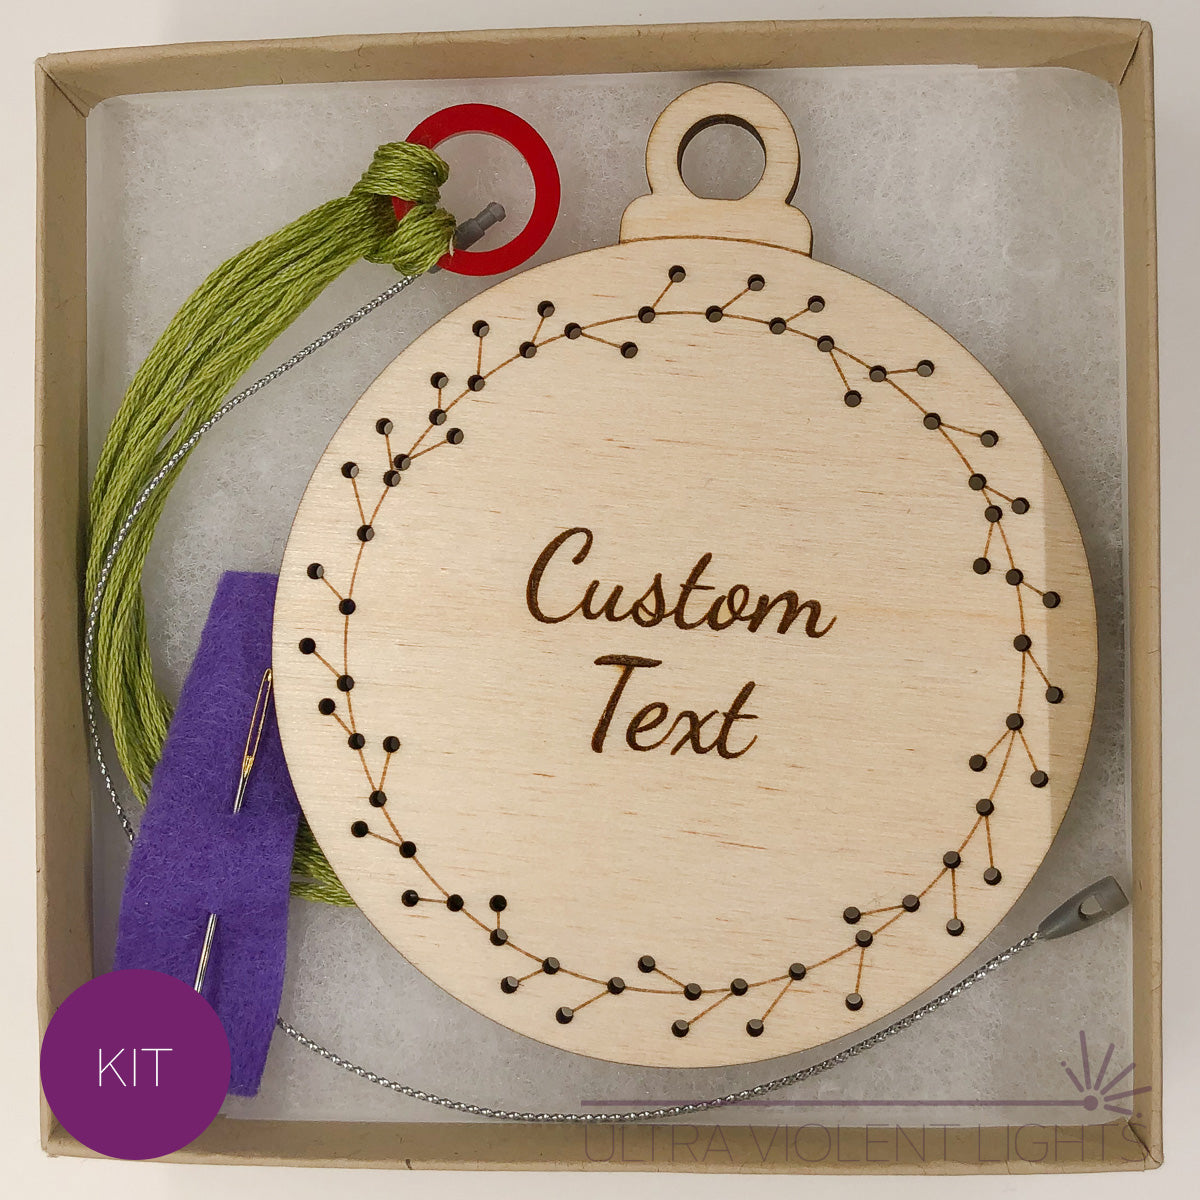 A text wreath wooden embroidery kit with floss and a needle in a box